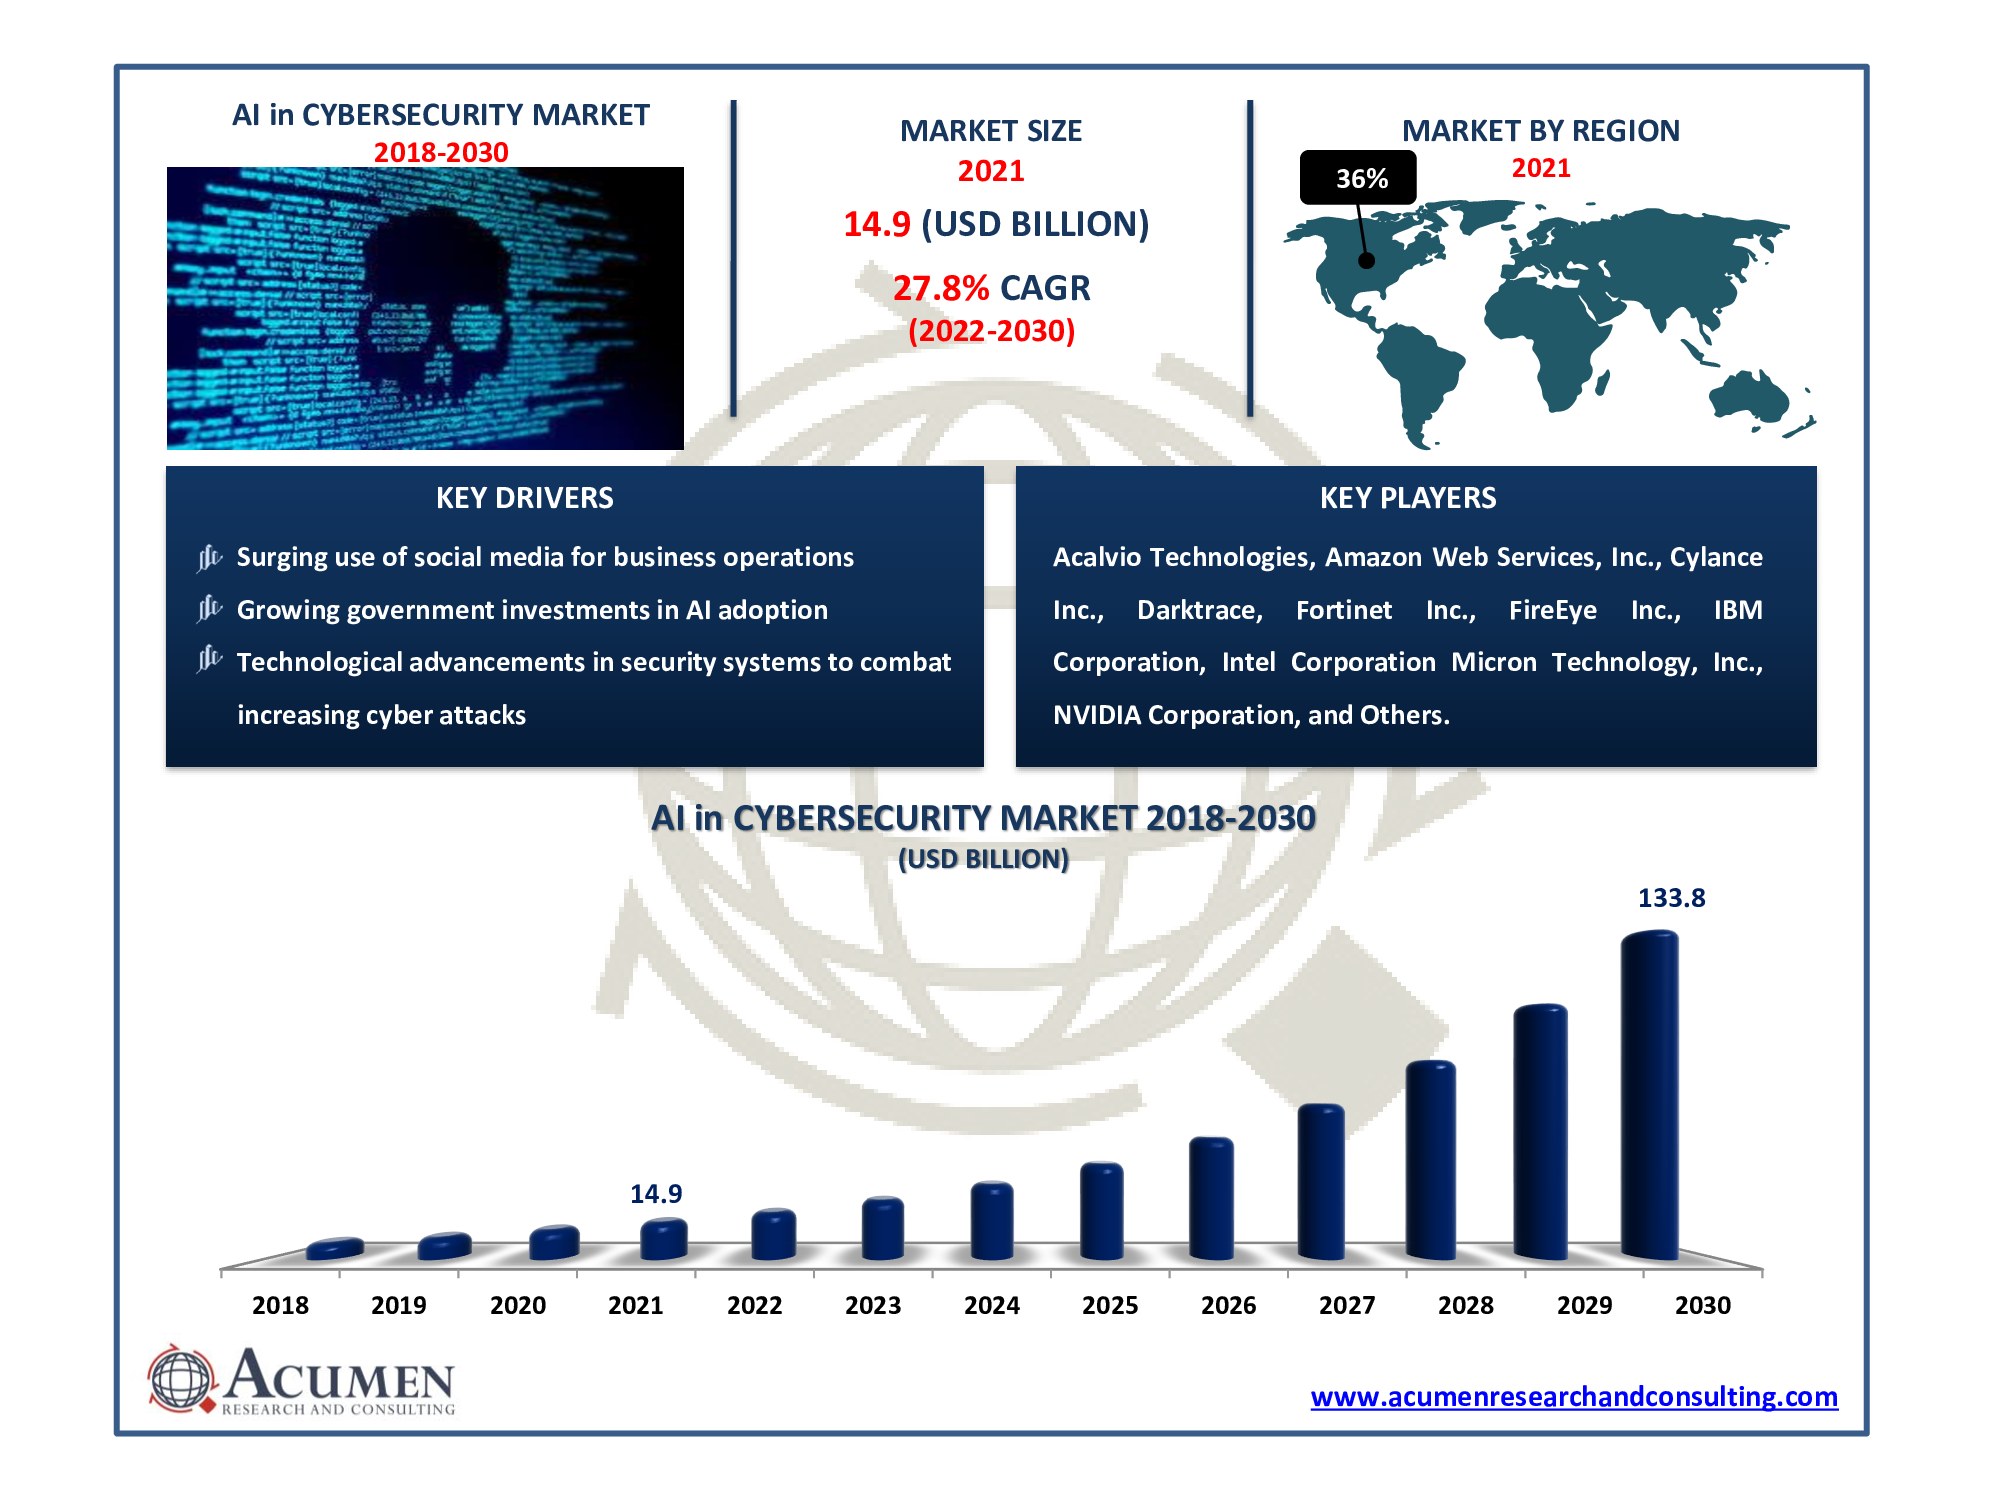 Artificial Intelligence (AI) in Cybersecurity Market size accounted for USD 14.9 Billion in 2021 and is estimated to reach the market value of USD 133.8 Billion by 2030.